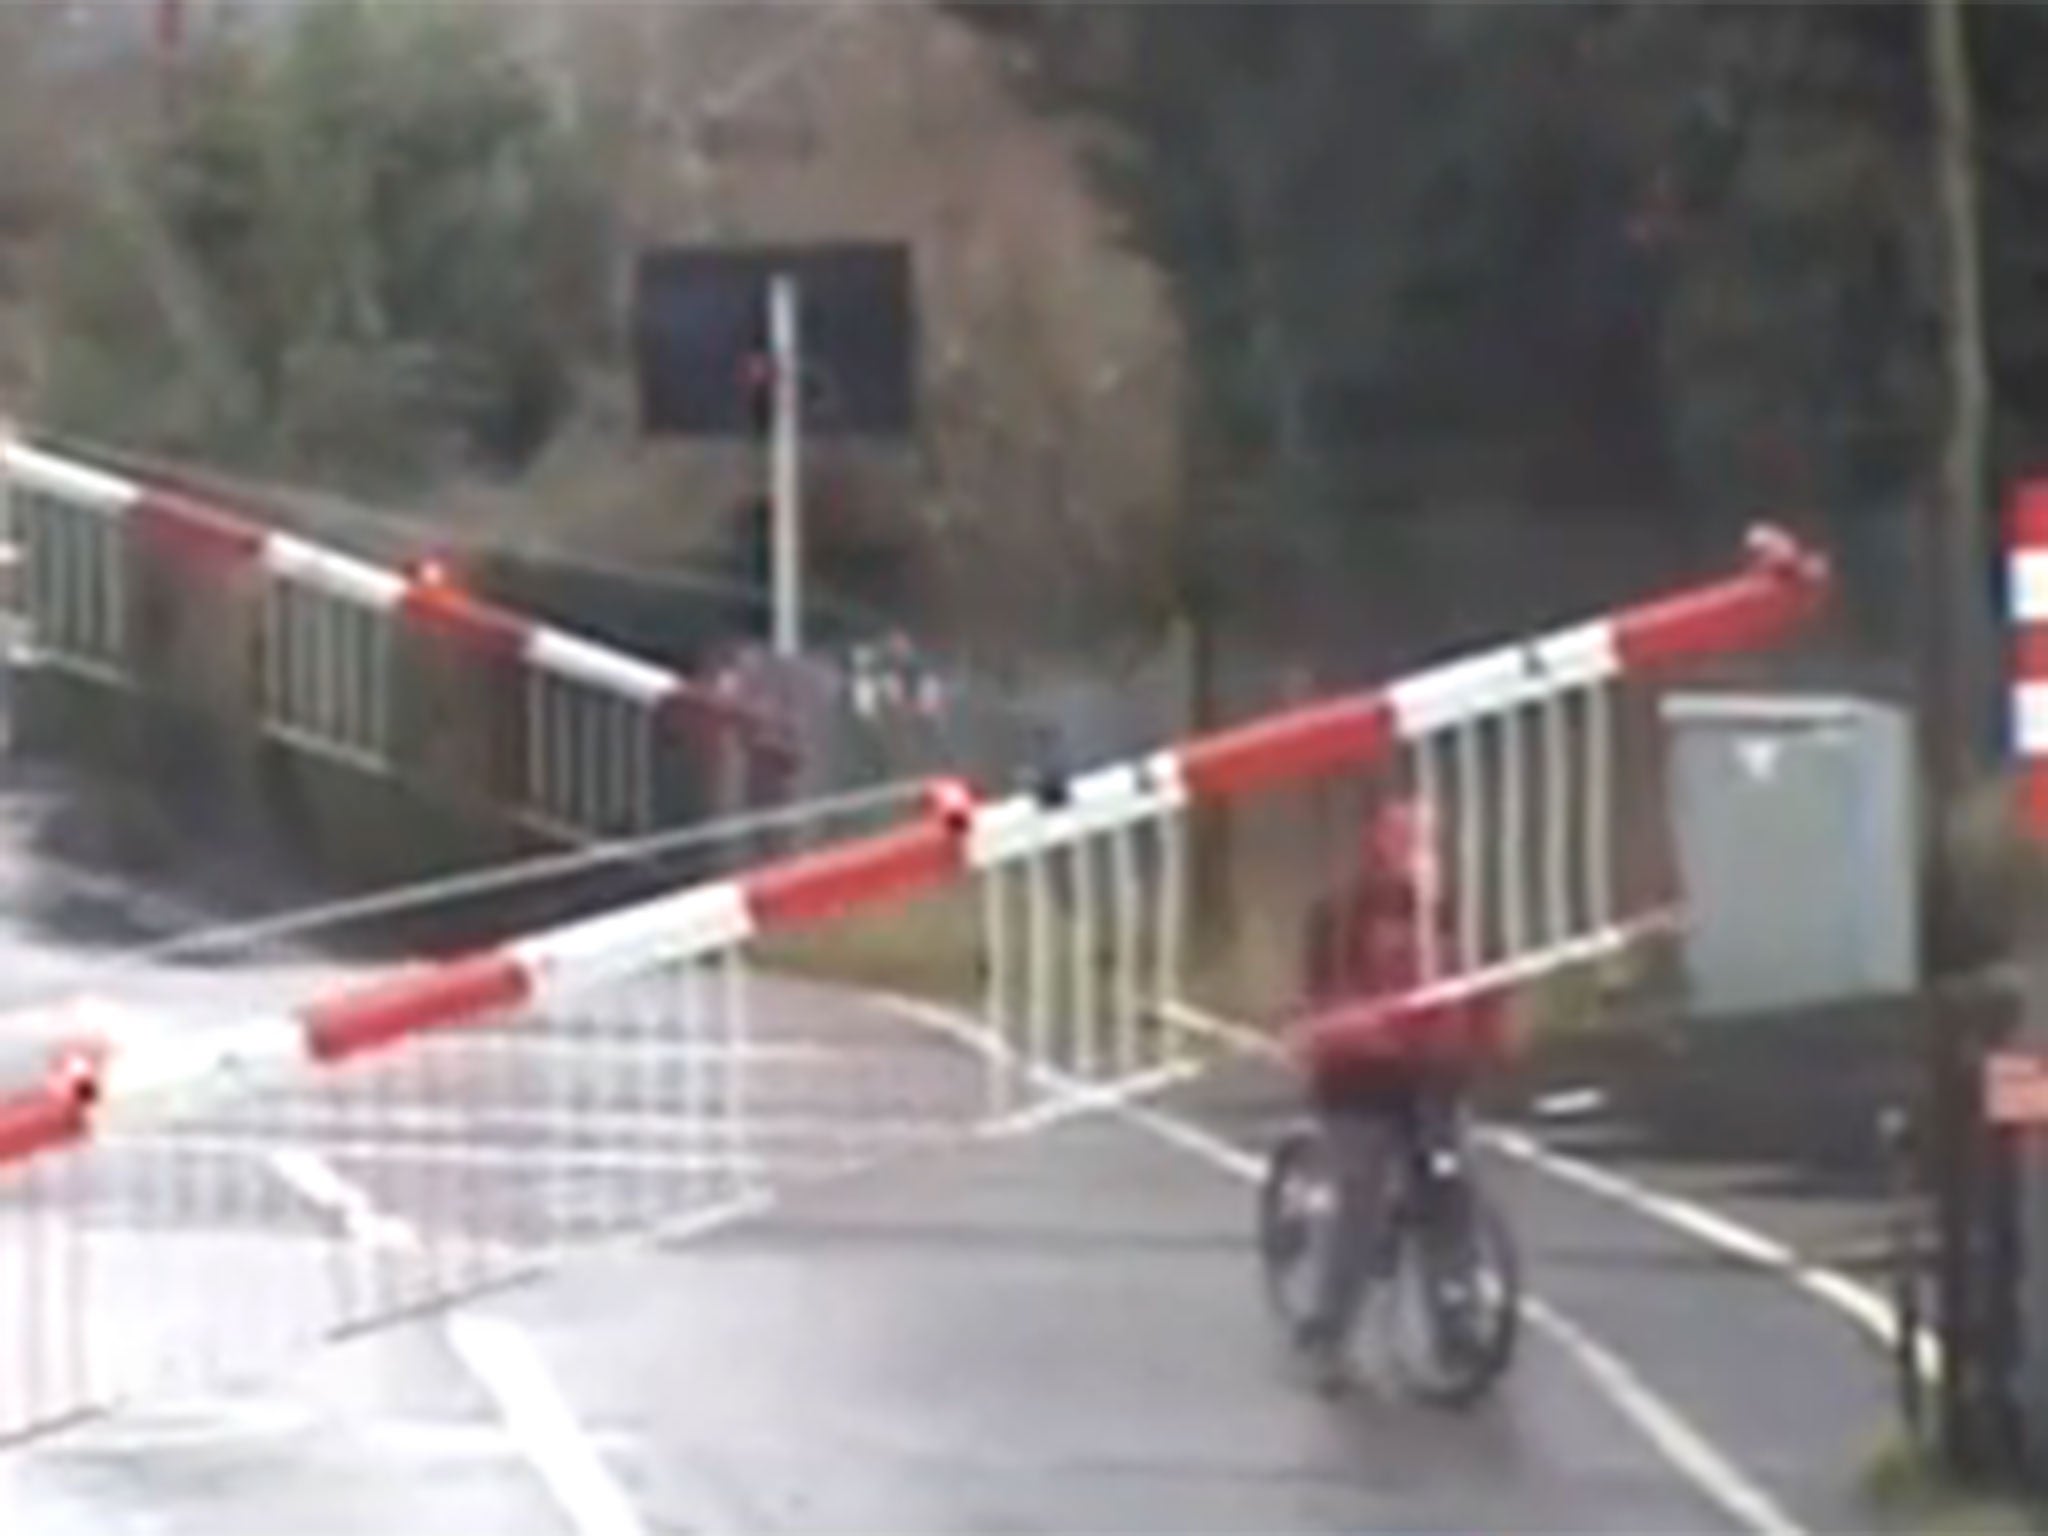 The cyclist became trapped after the level crossing barriers came down